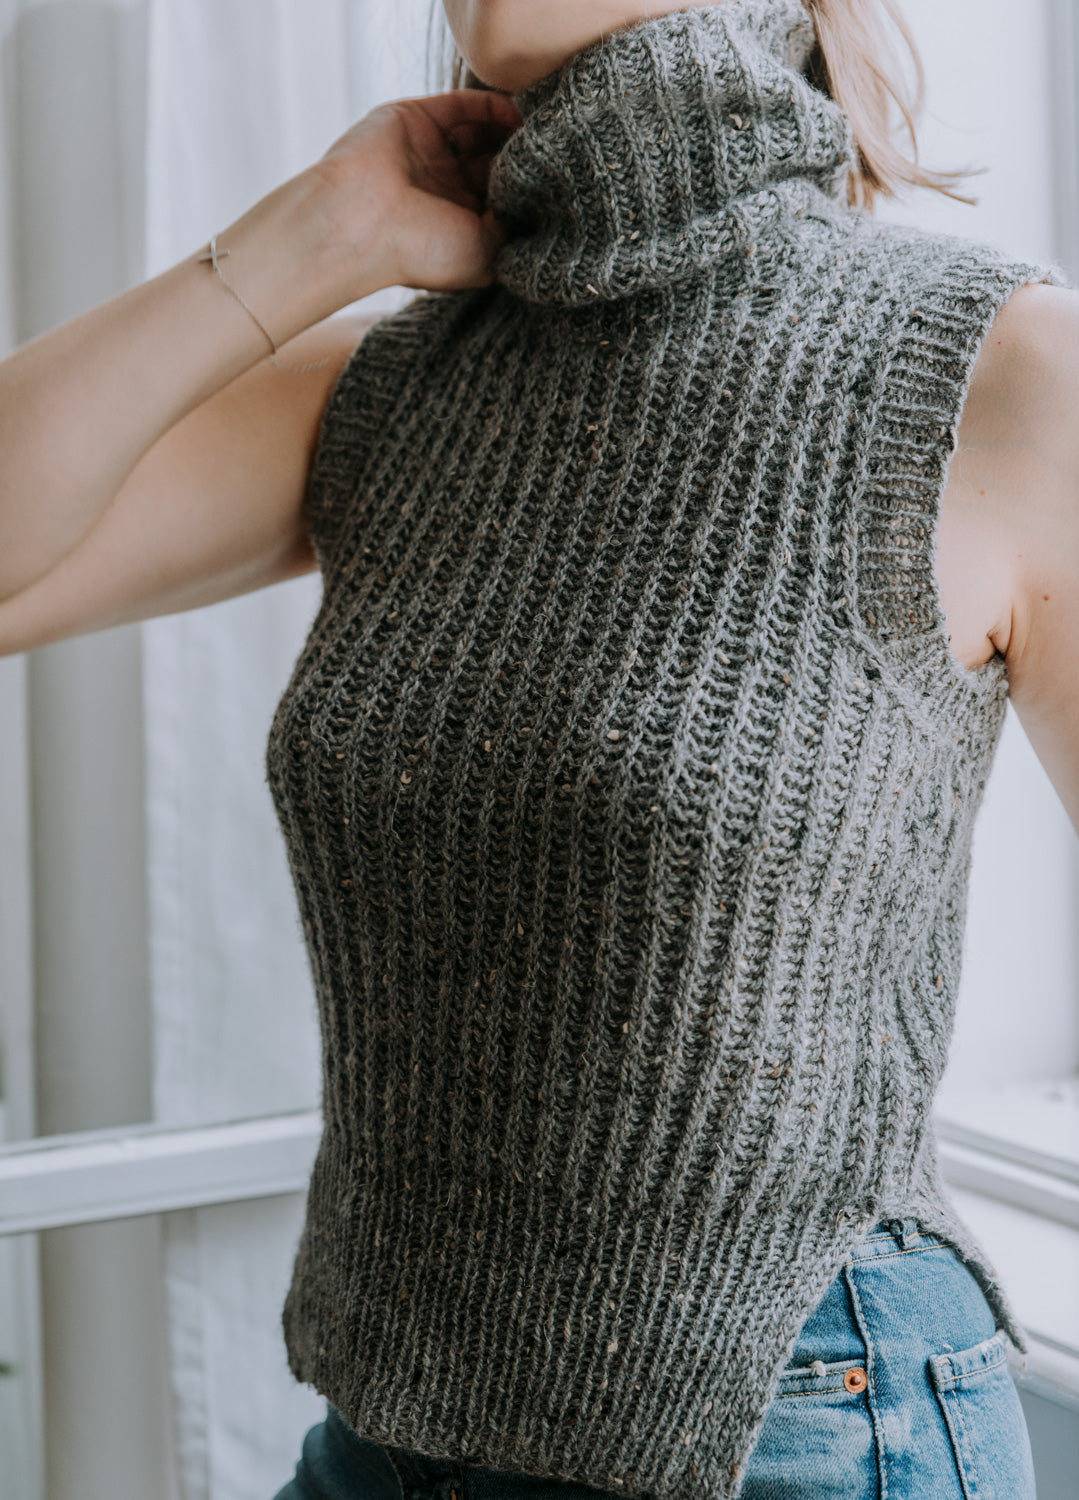 Melody Slipover Vest Free Pattern x @violist.knits – We are knitters